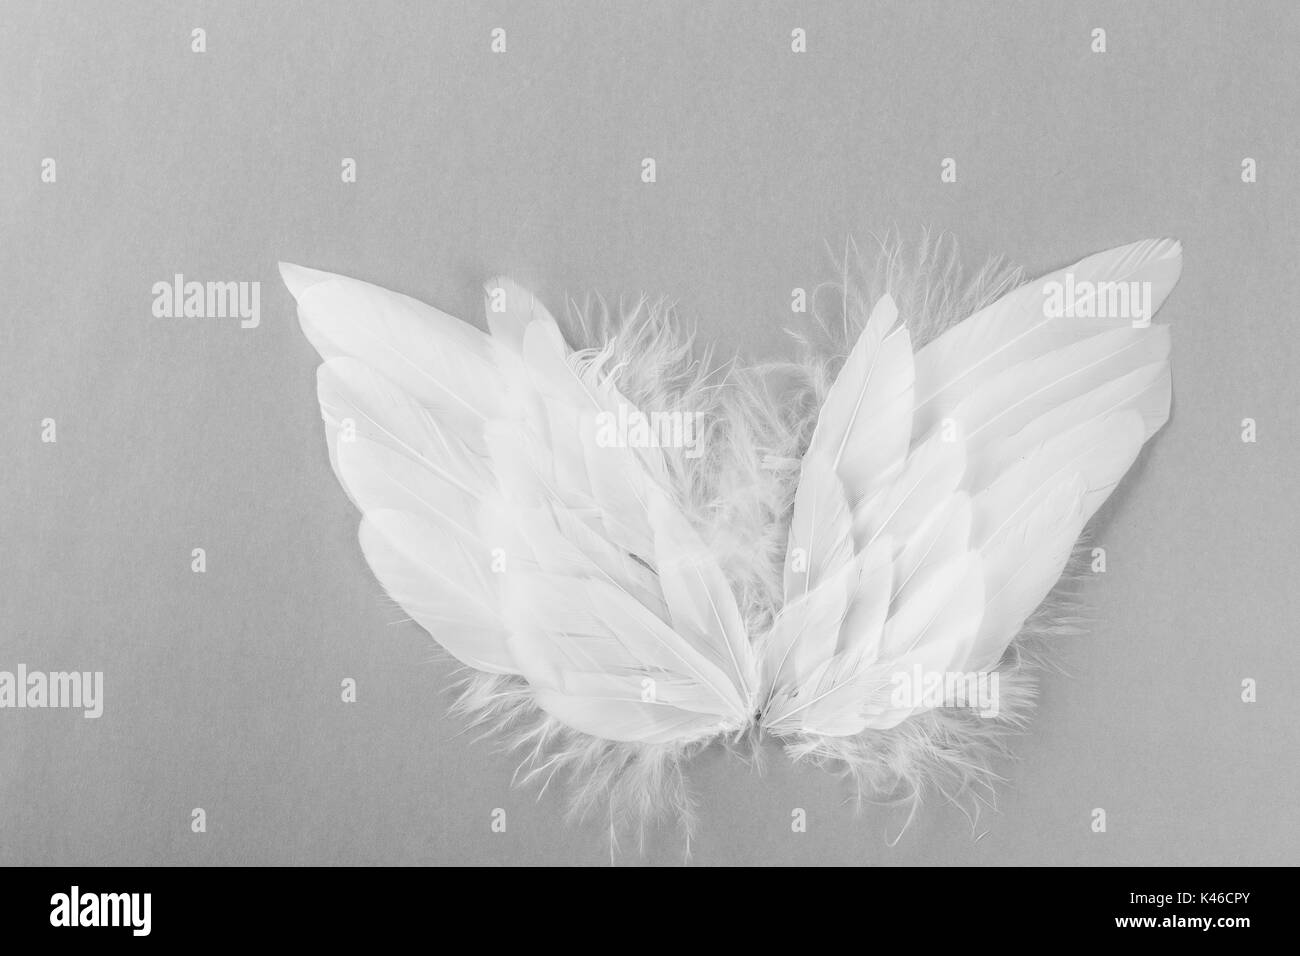 angel wings on grey background Stock Photo